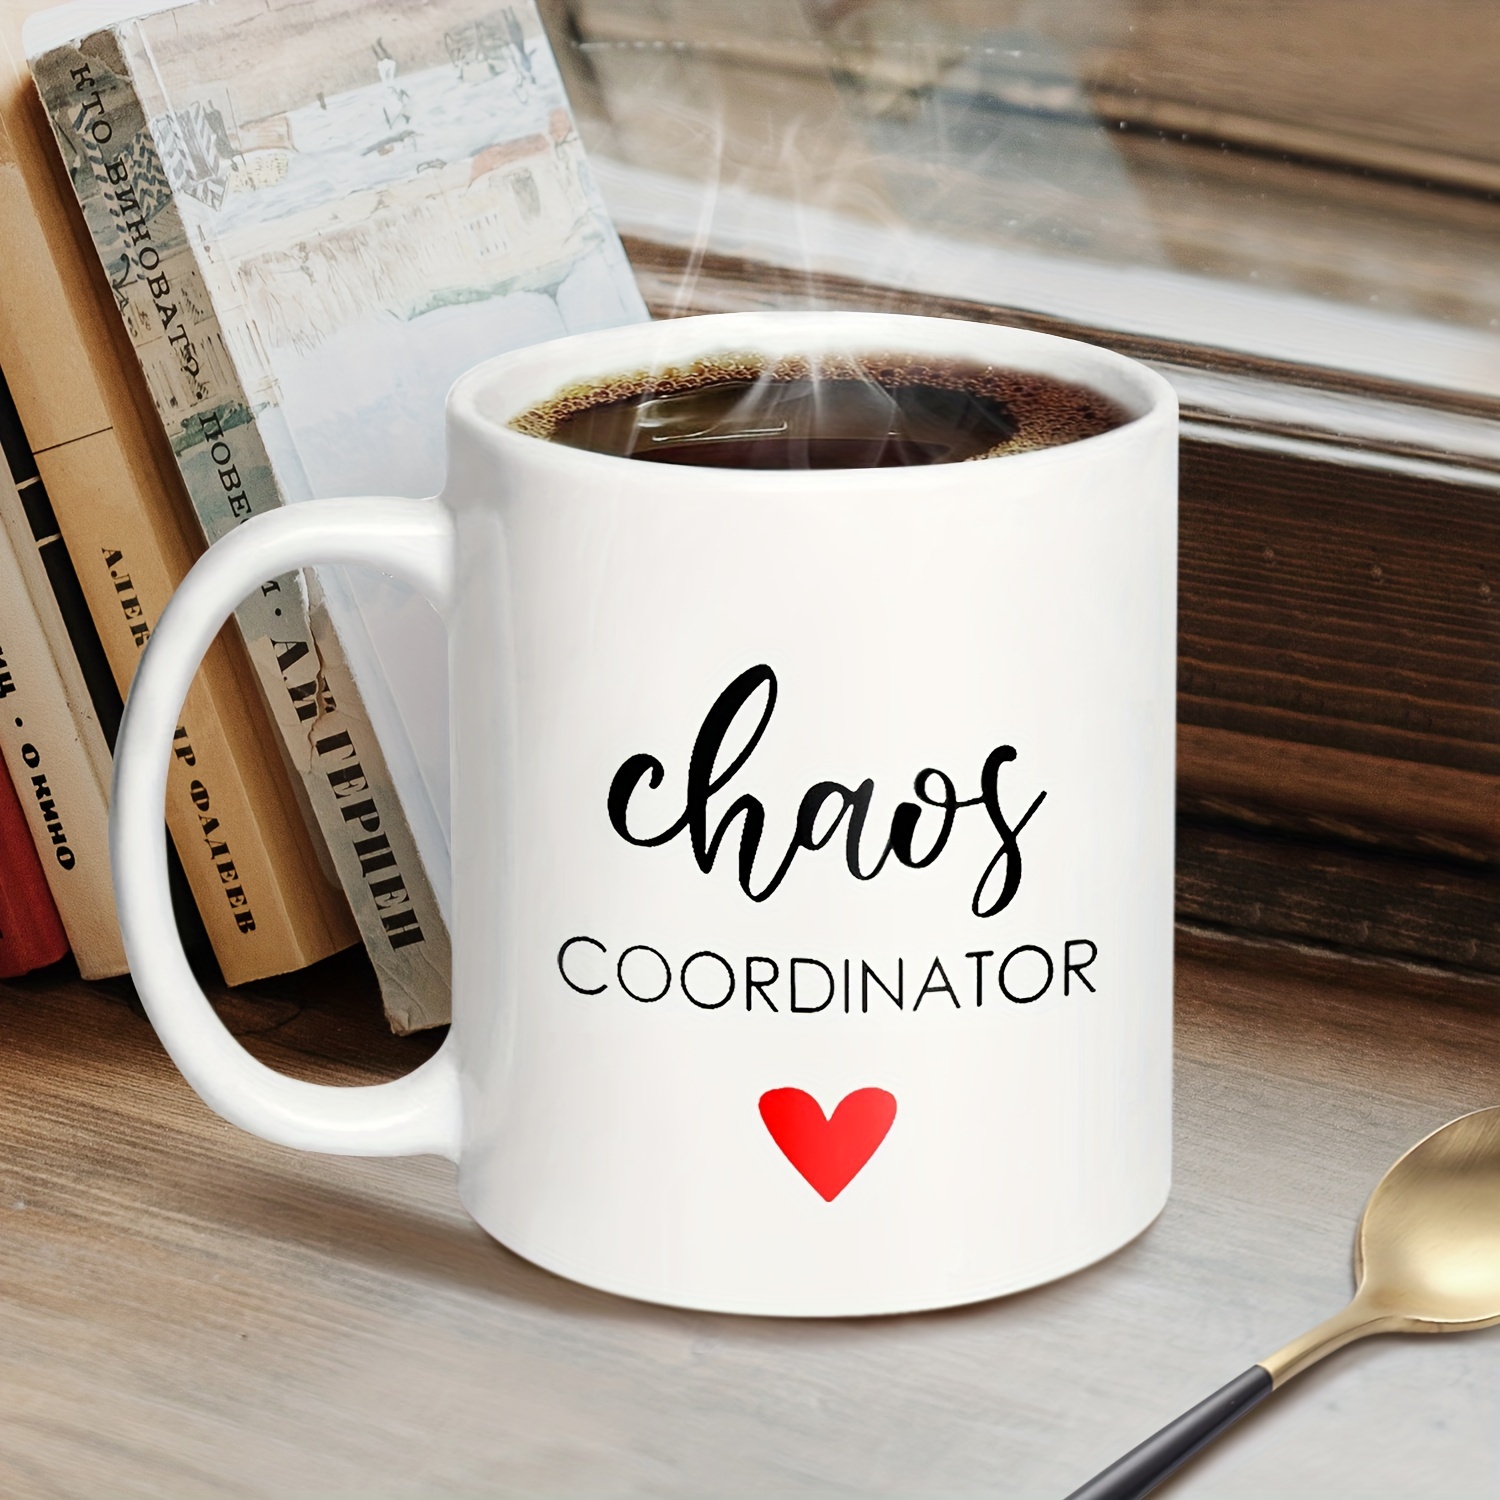 Best Boss Ever Coffee Mug Woman Cool Gift for Boss Lady Best Boss Mug Cute  Boss Gifts Female Boss Mug Tea Cup Gift for Mom Women's Gifts 